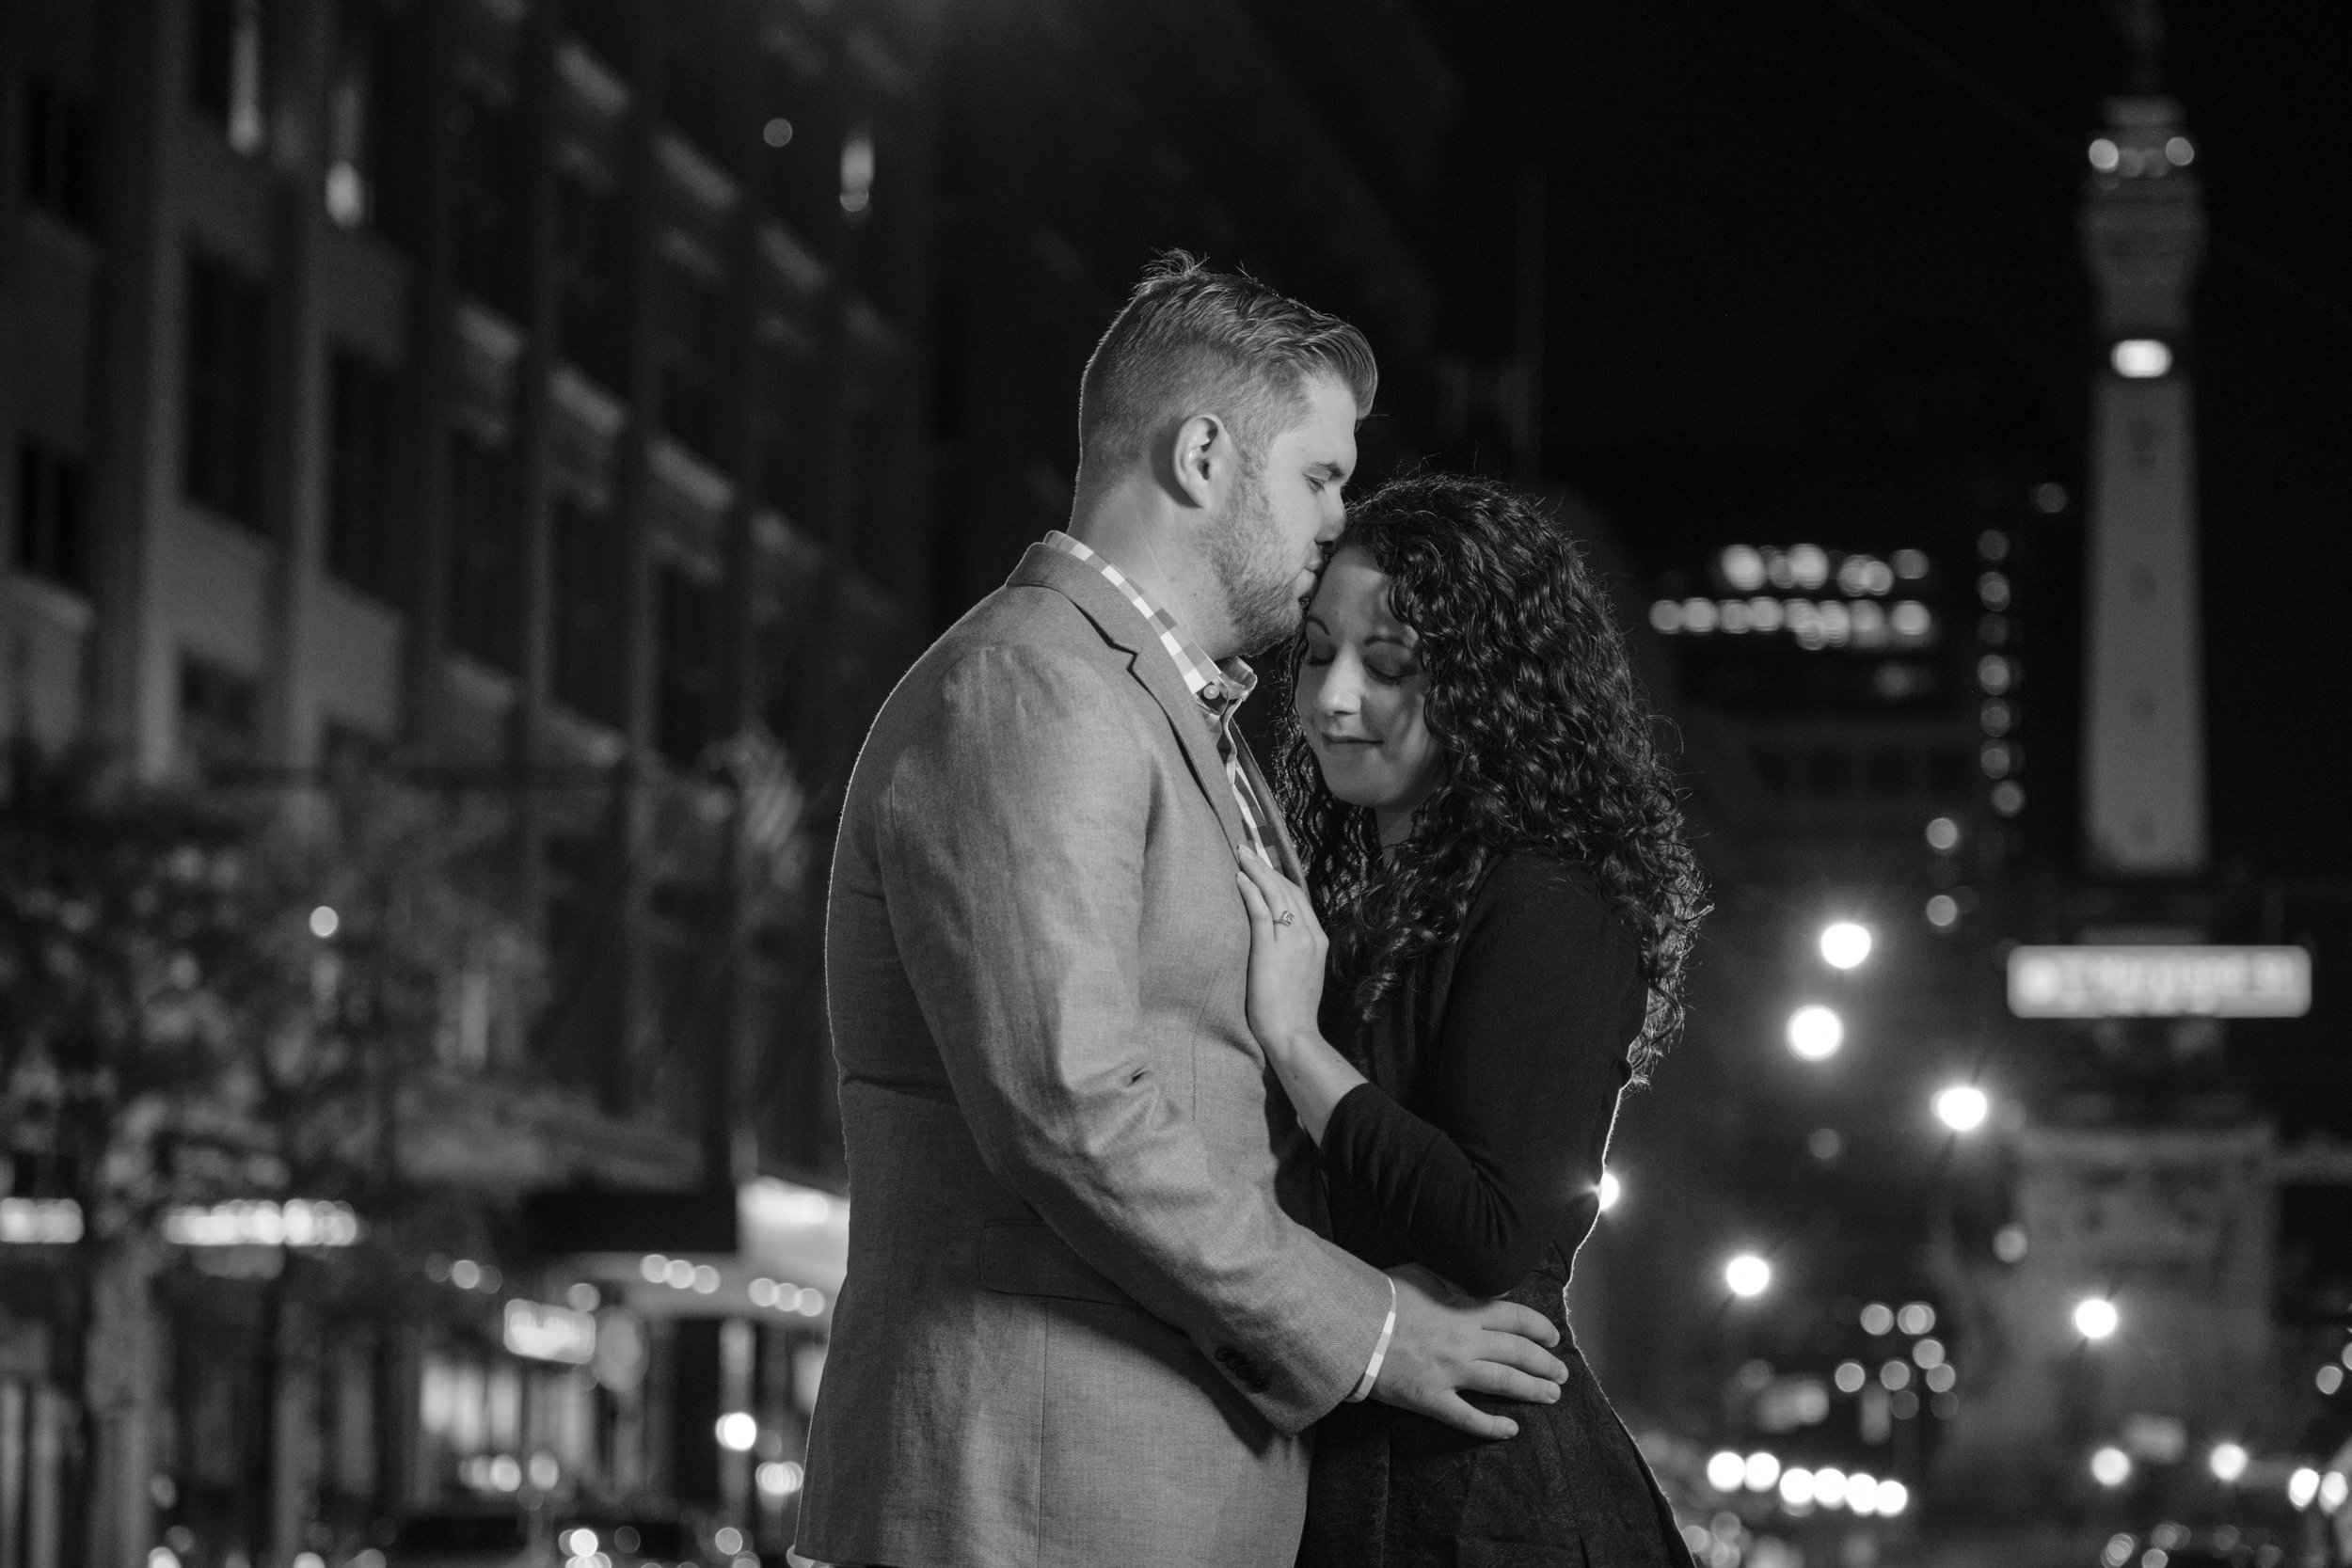 Downtown-Indianapolis-night-engagement-pictures-25.jpg